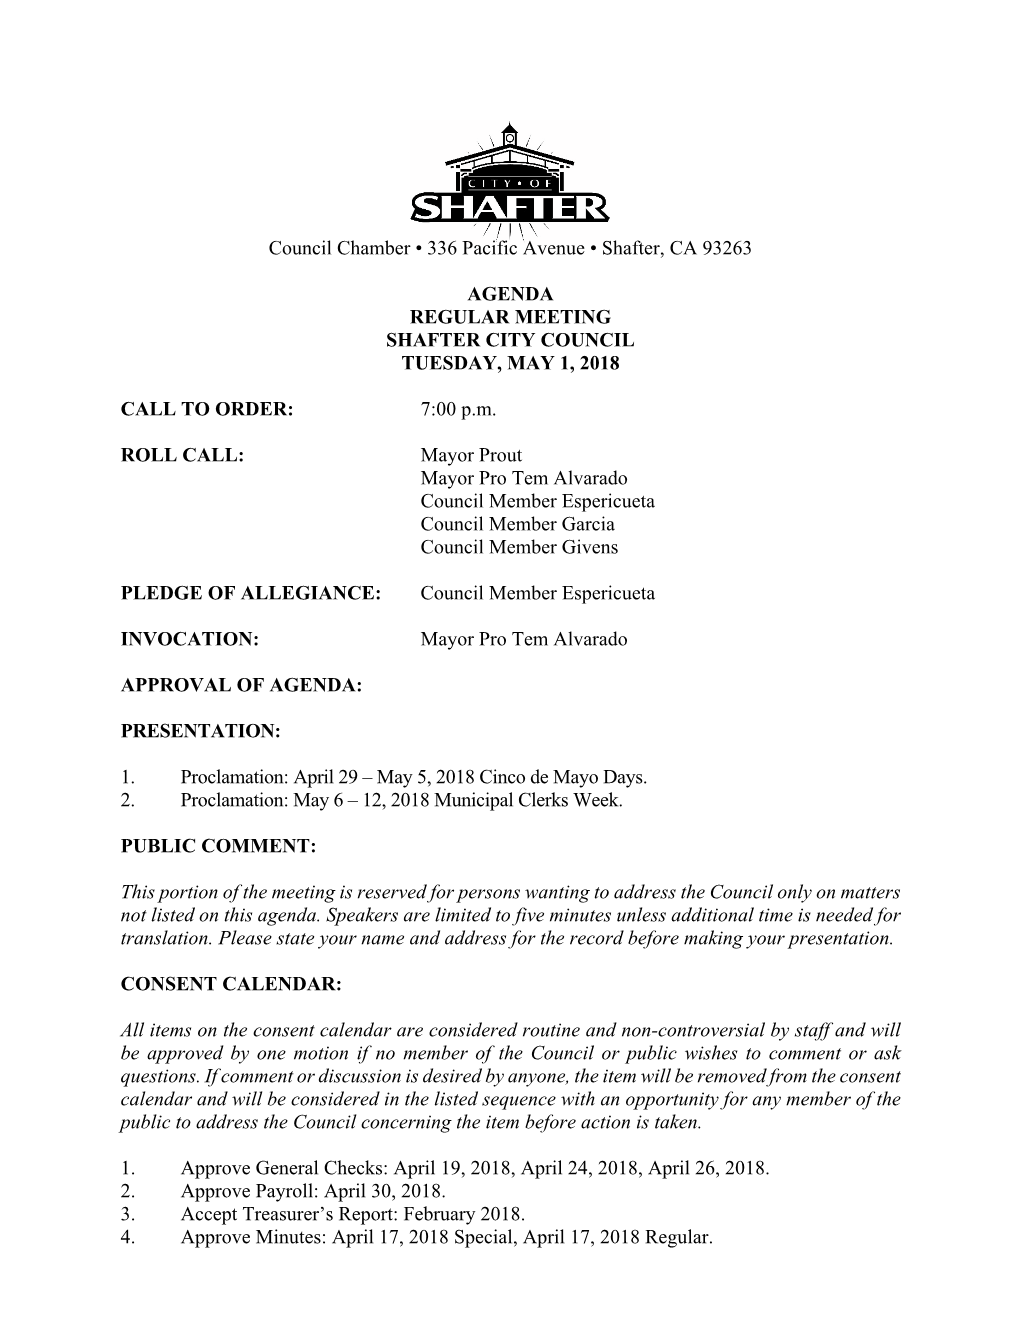 Council Chamber • 336 Pacific Avenue • Shafter, CA 93263 AGENDA REGULAR MEETING SHAFTER CITY COUNCIL TUESDAY, MAY 1, 2018 CA